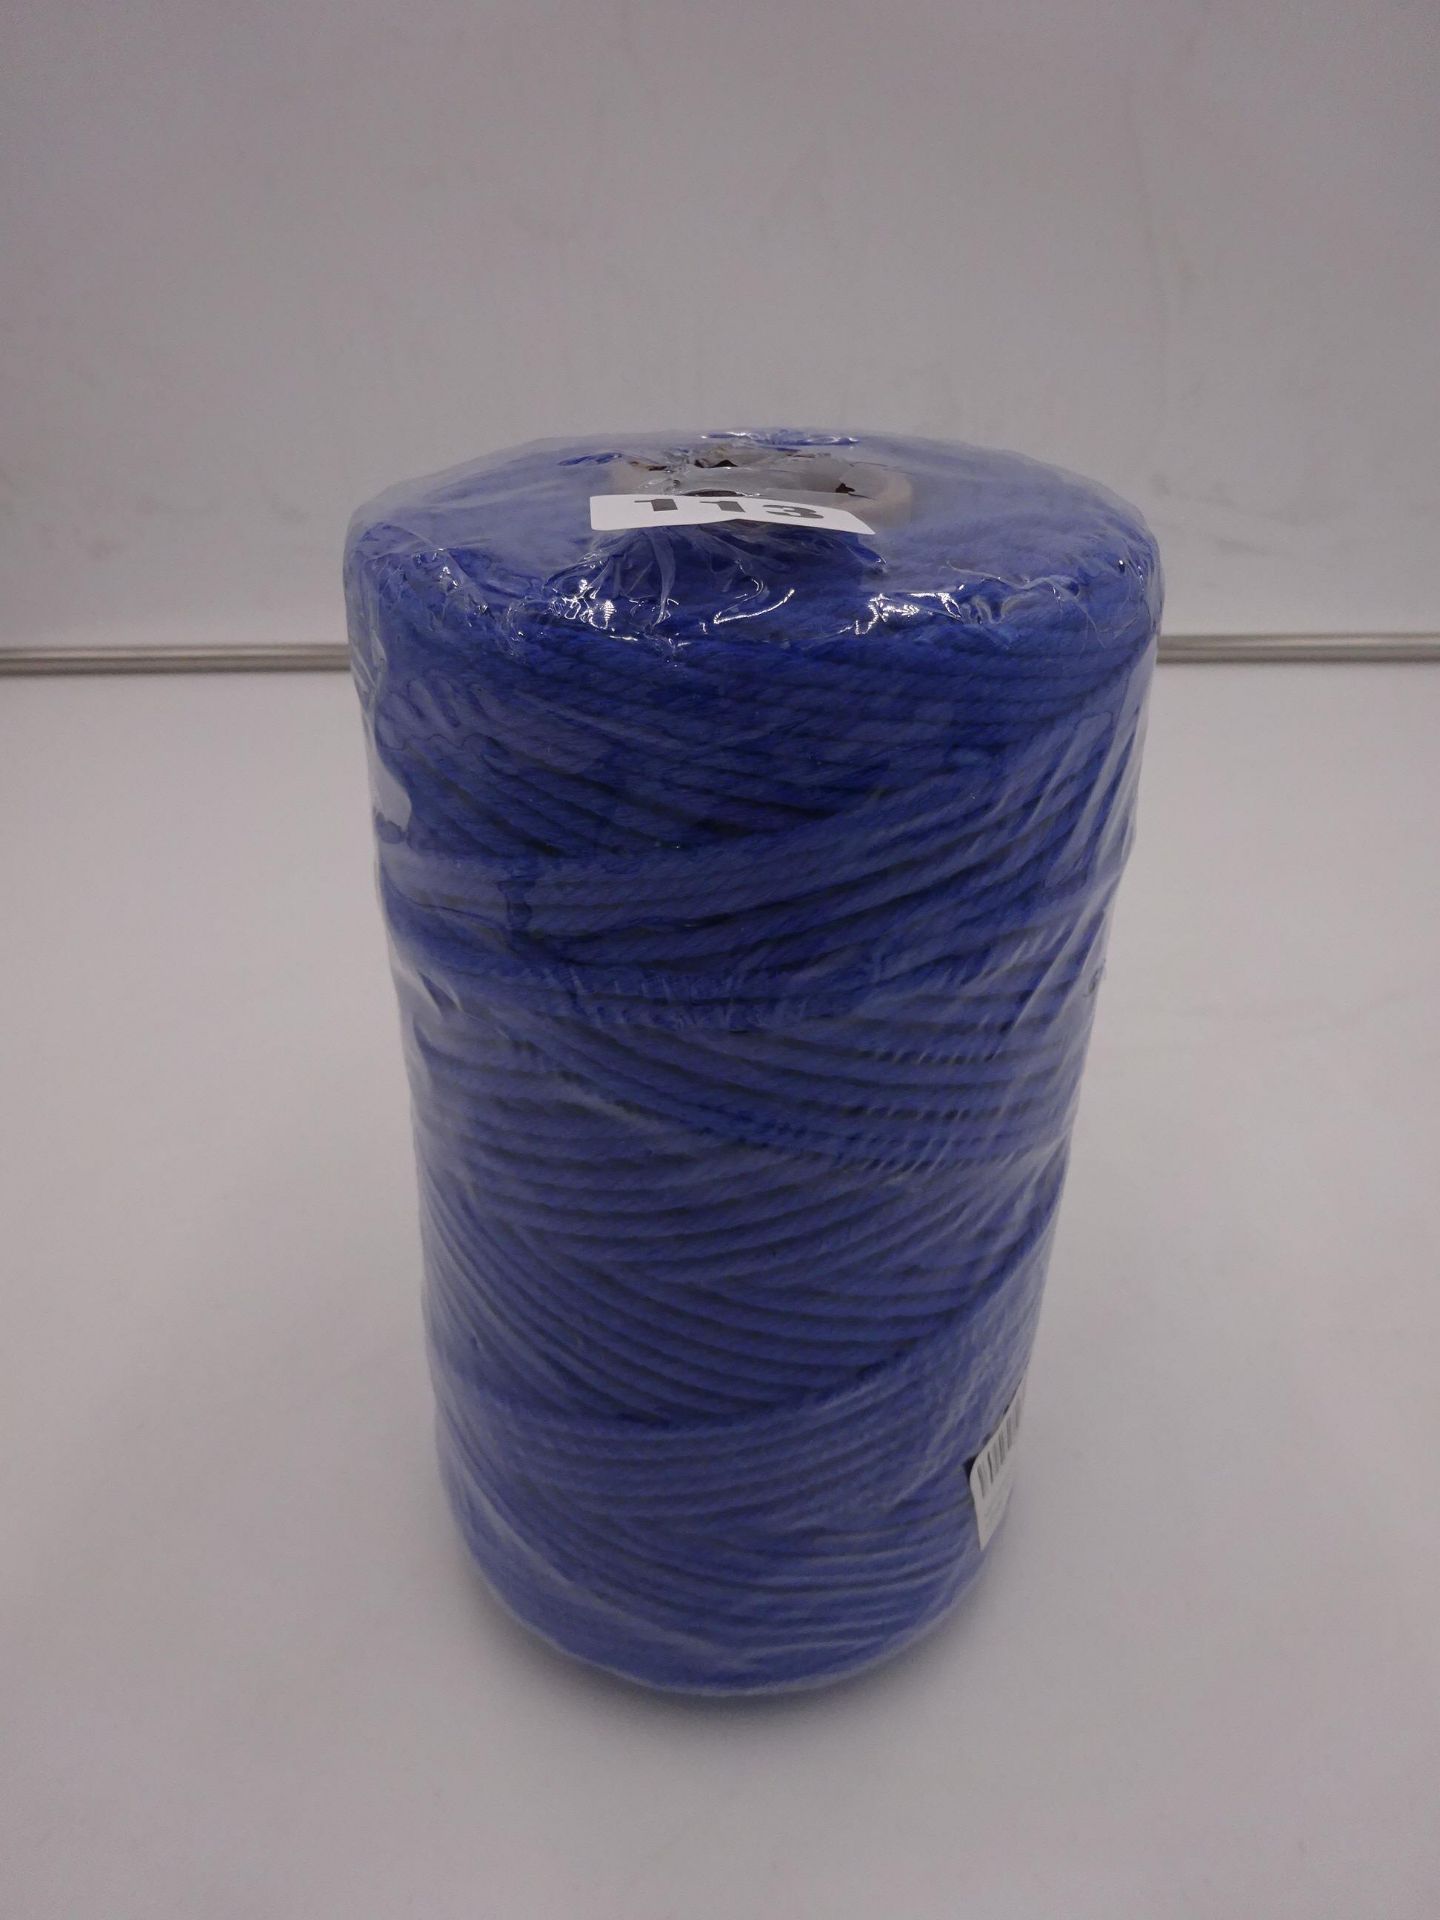 NEW ROLL OF BLUE STRING